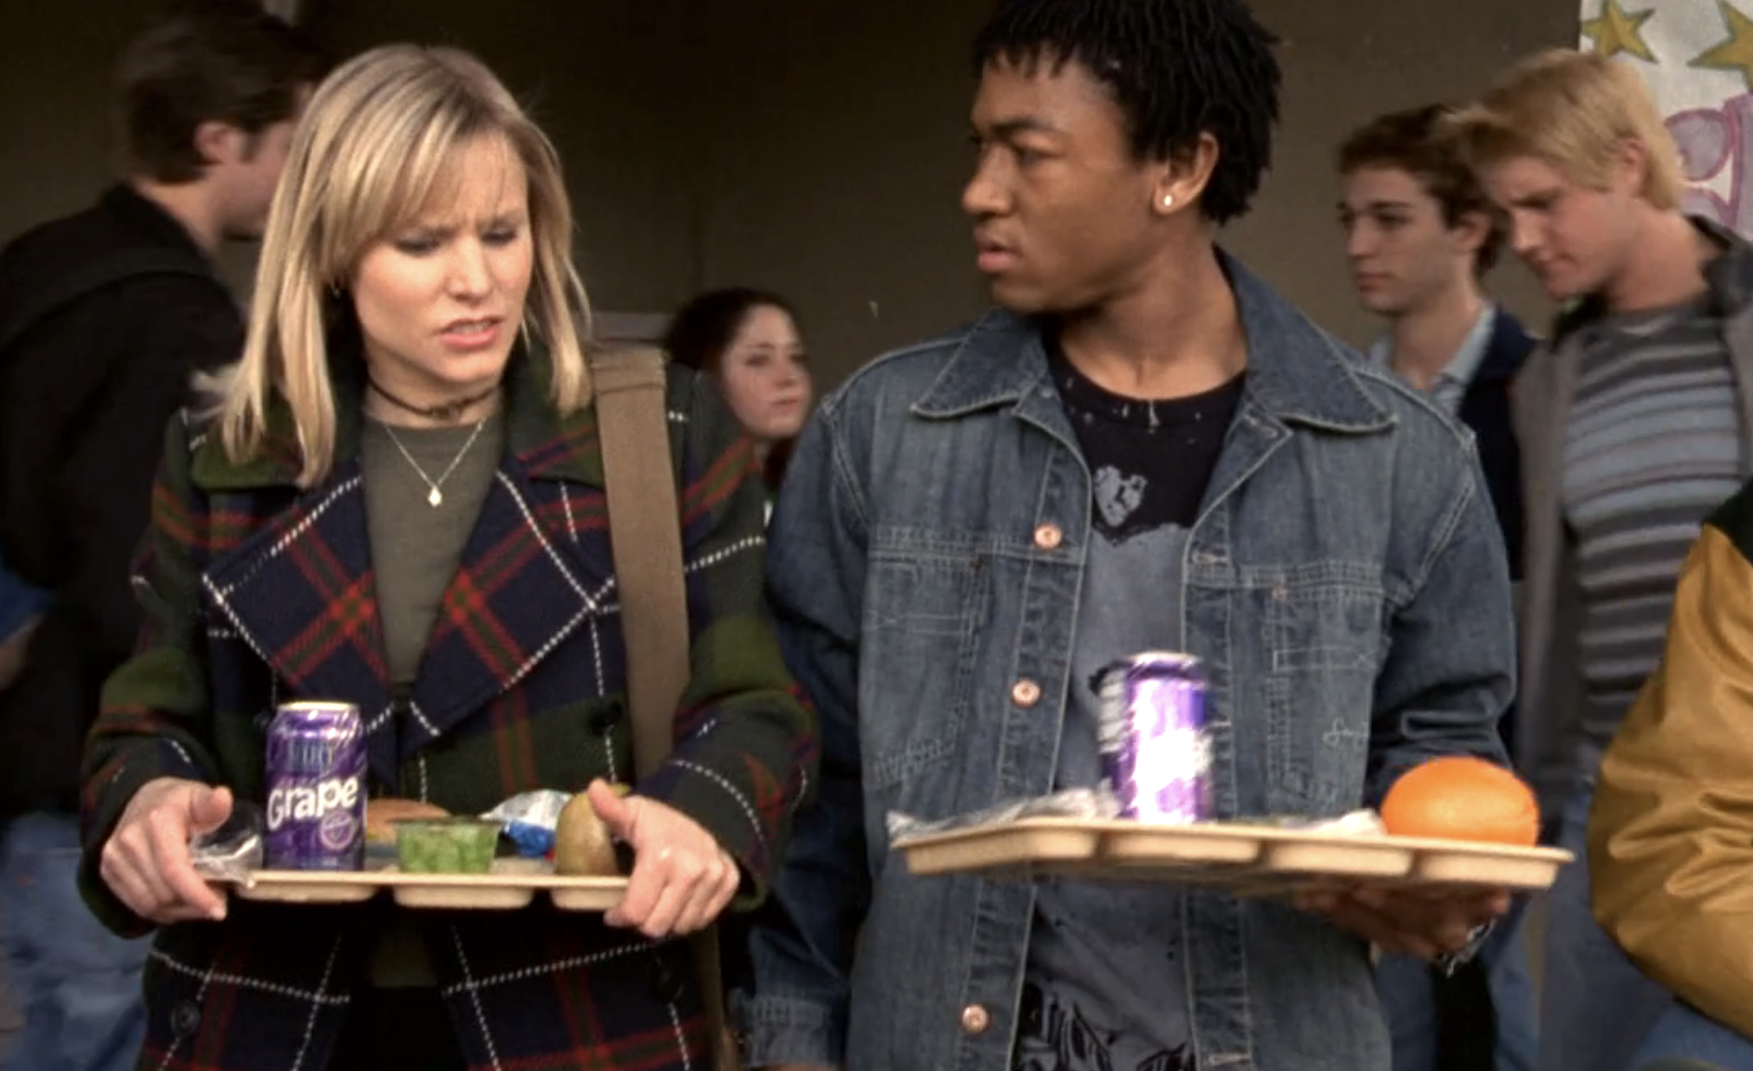 Screenshot from Veronica Mars S1E19. Veronica, a young white woman in a plaid jacket, and Wallace, a young Black man in a jean jacket are walking while carrying lunch trays. They are chatting and both look upset.